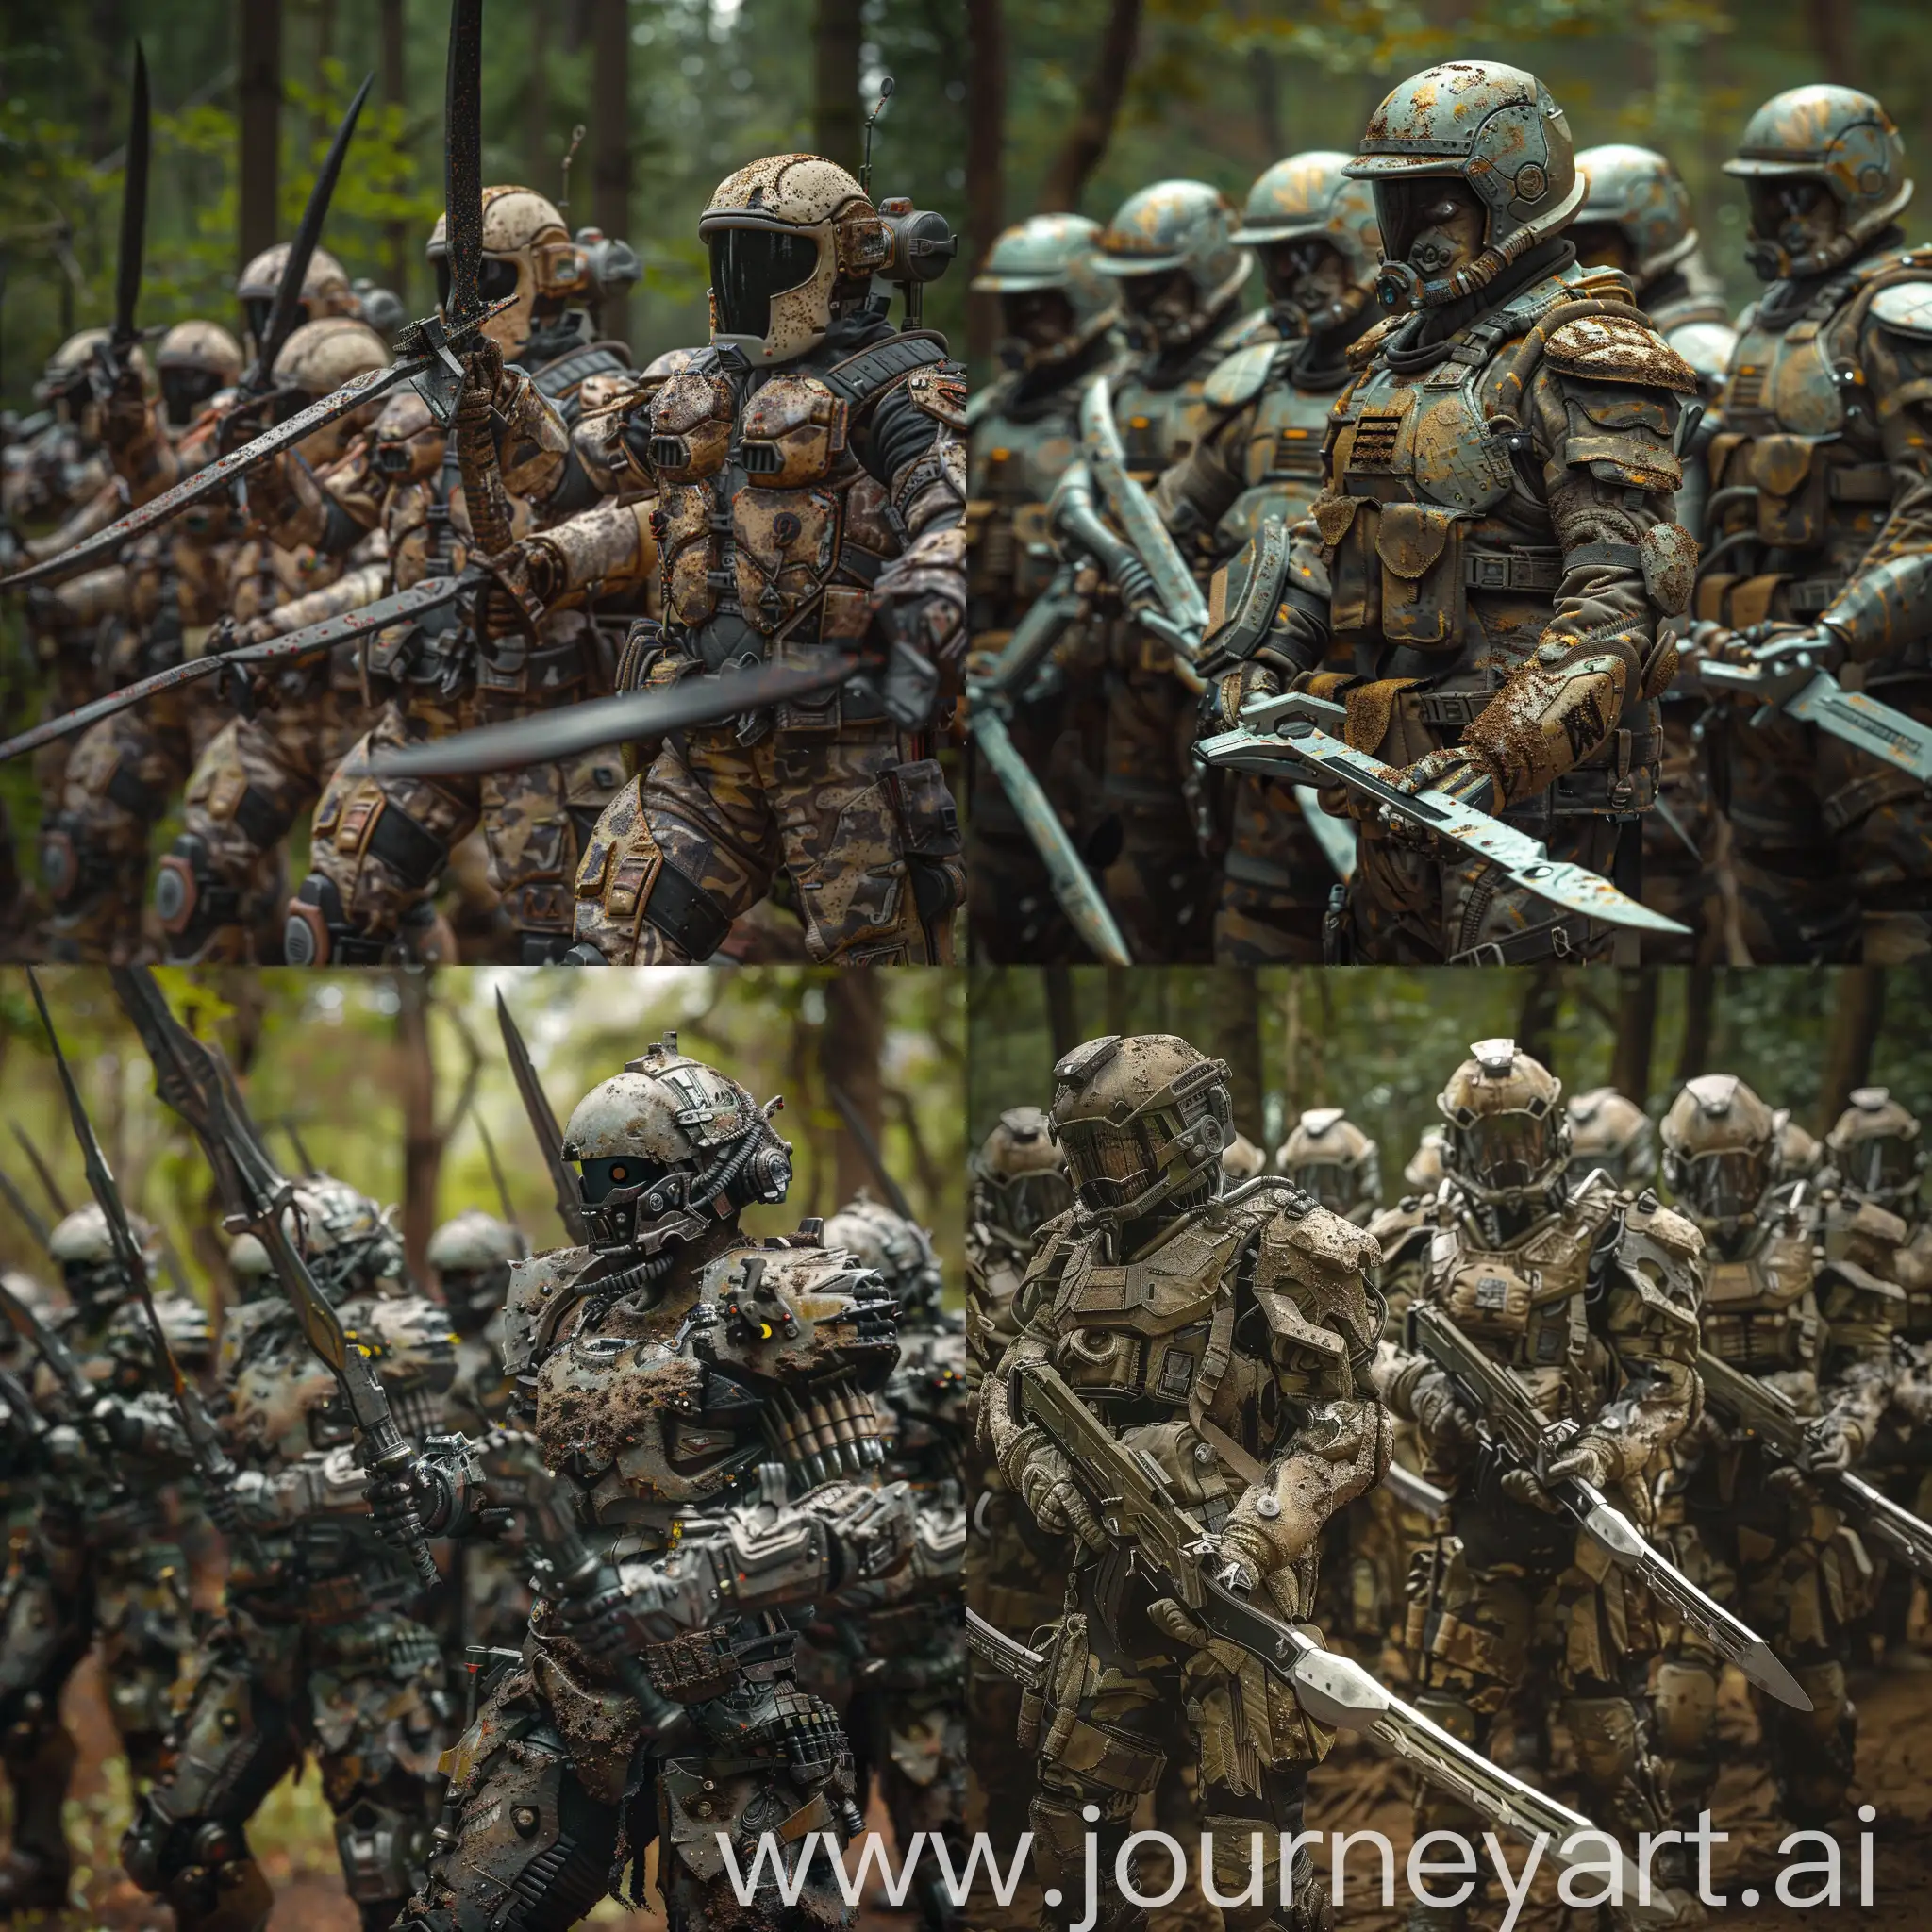 Futuristic-Dune-Sardaukar-SciFi-Soldiers-in-Camouflage-Eager-for-Battle